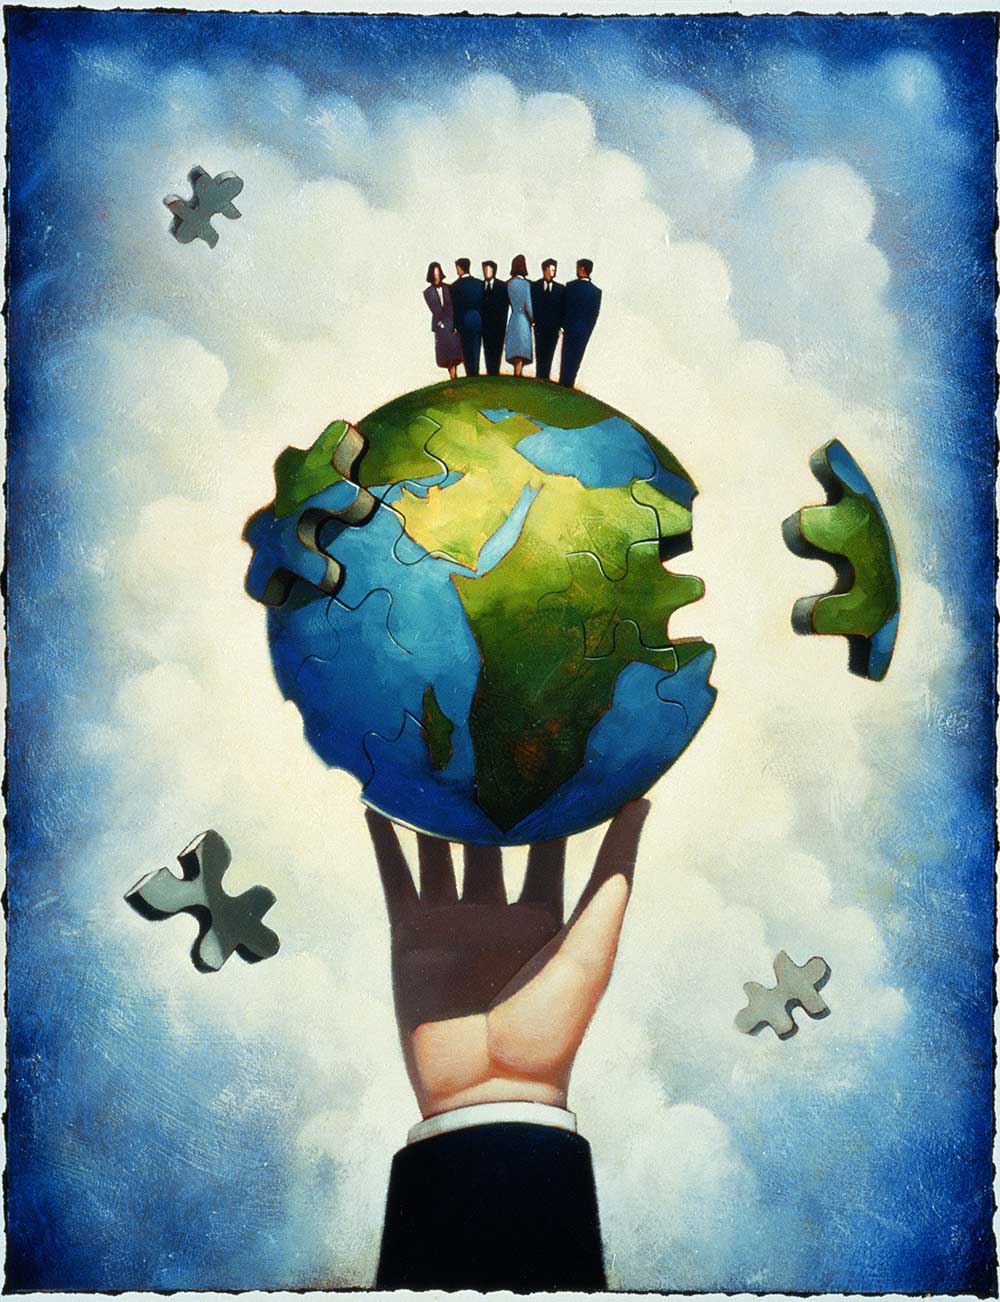 SOCIAL RESPONSIBILITY: Achieving Sustainability through Corporate Citizenship